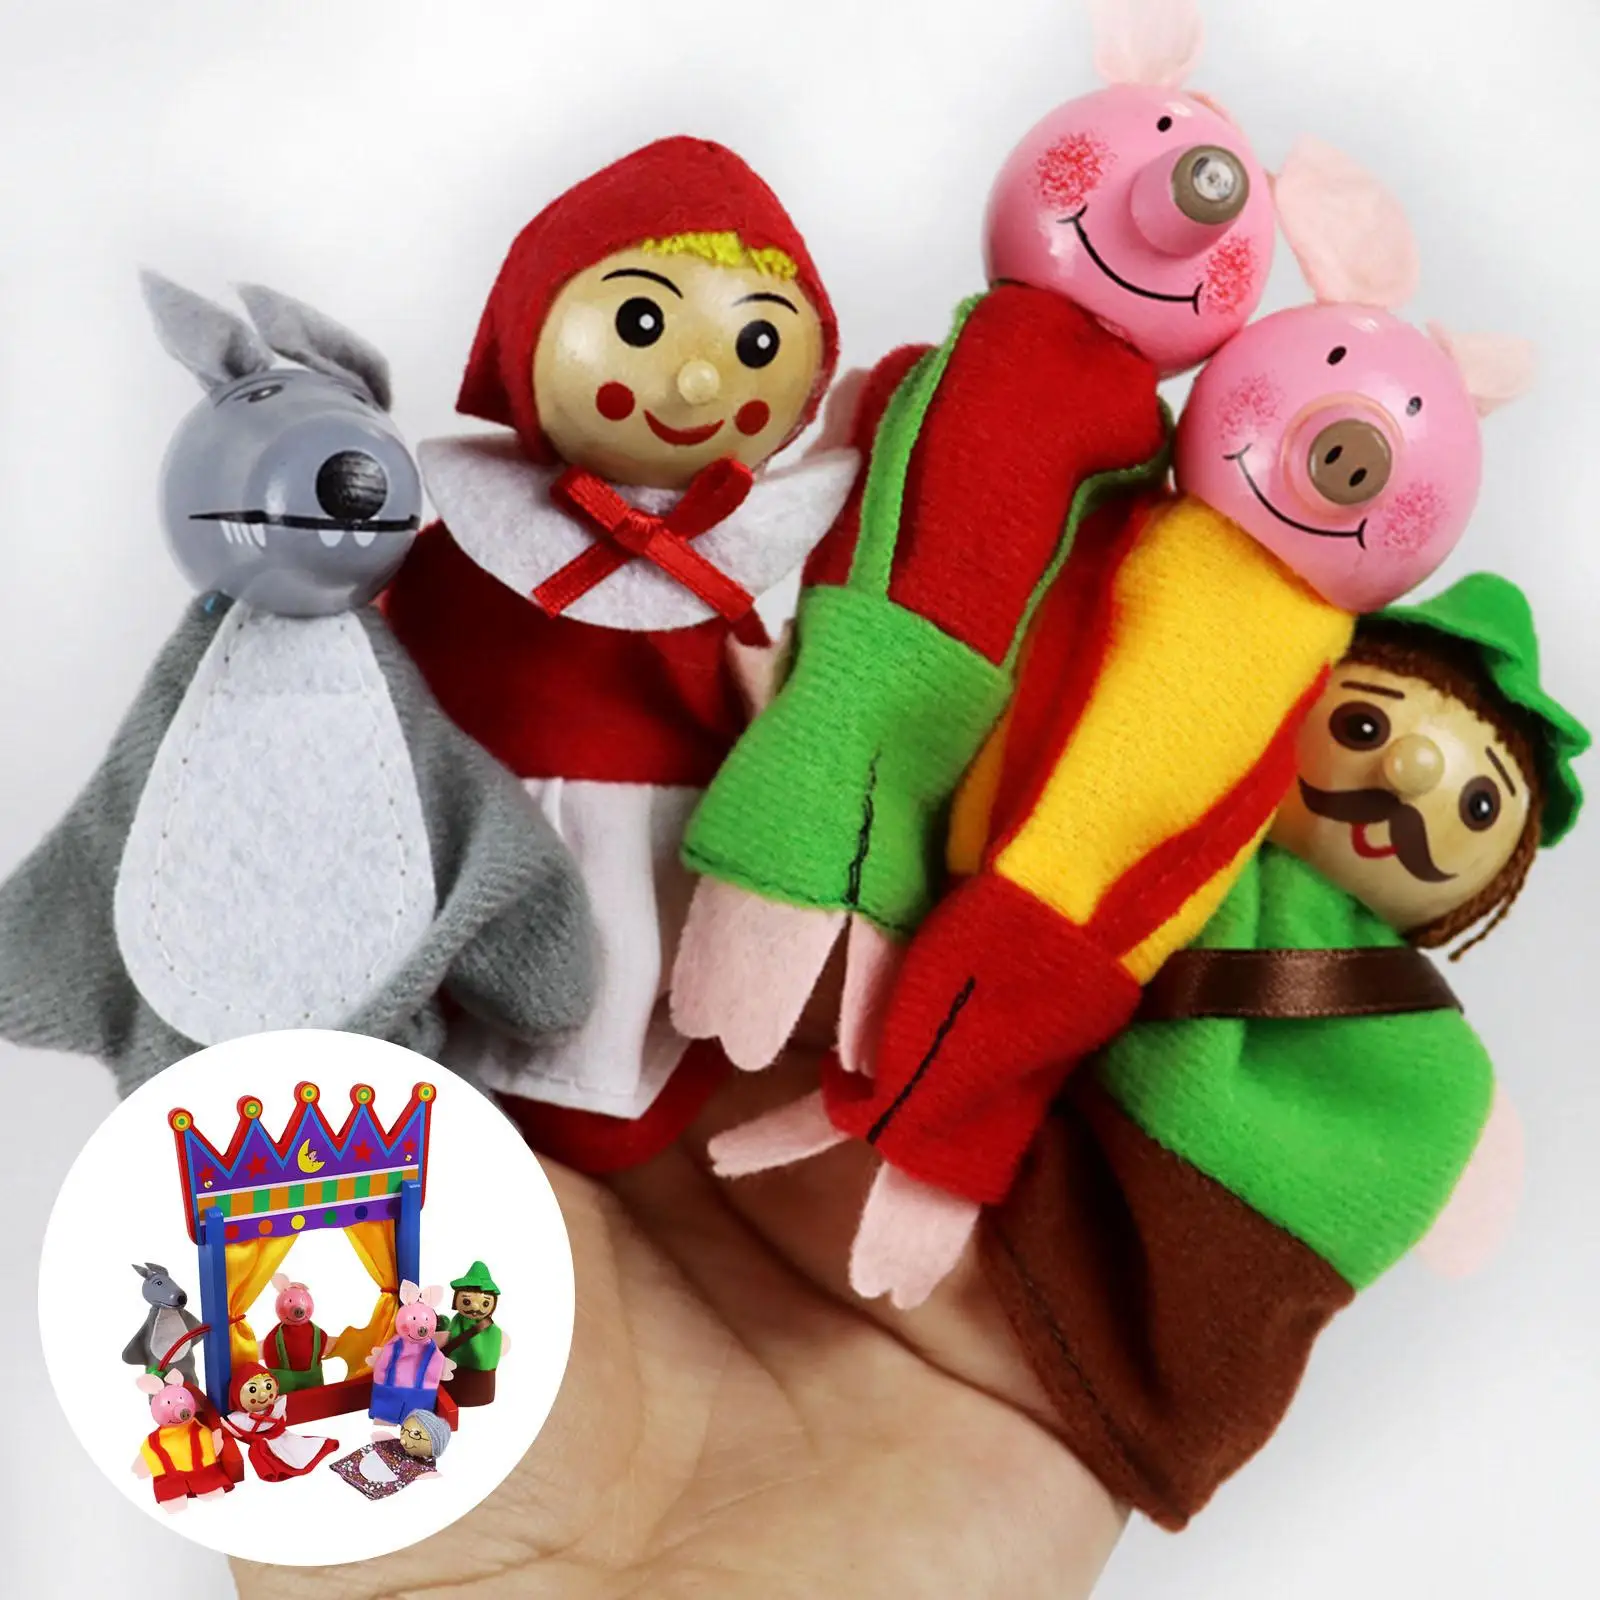 Simulation Mini Puppet Stand Set Decorations Finger Puppets for Preschool Role Play Games Activities Story Telling Girls Boys